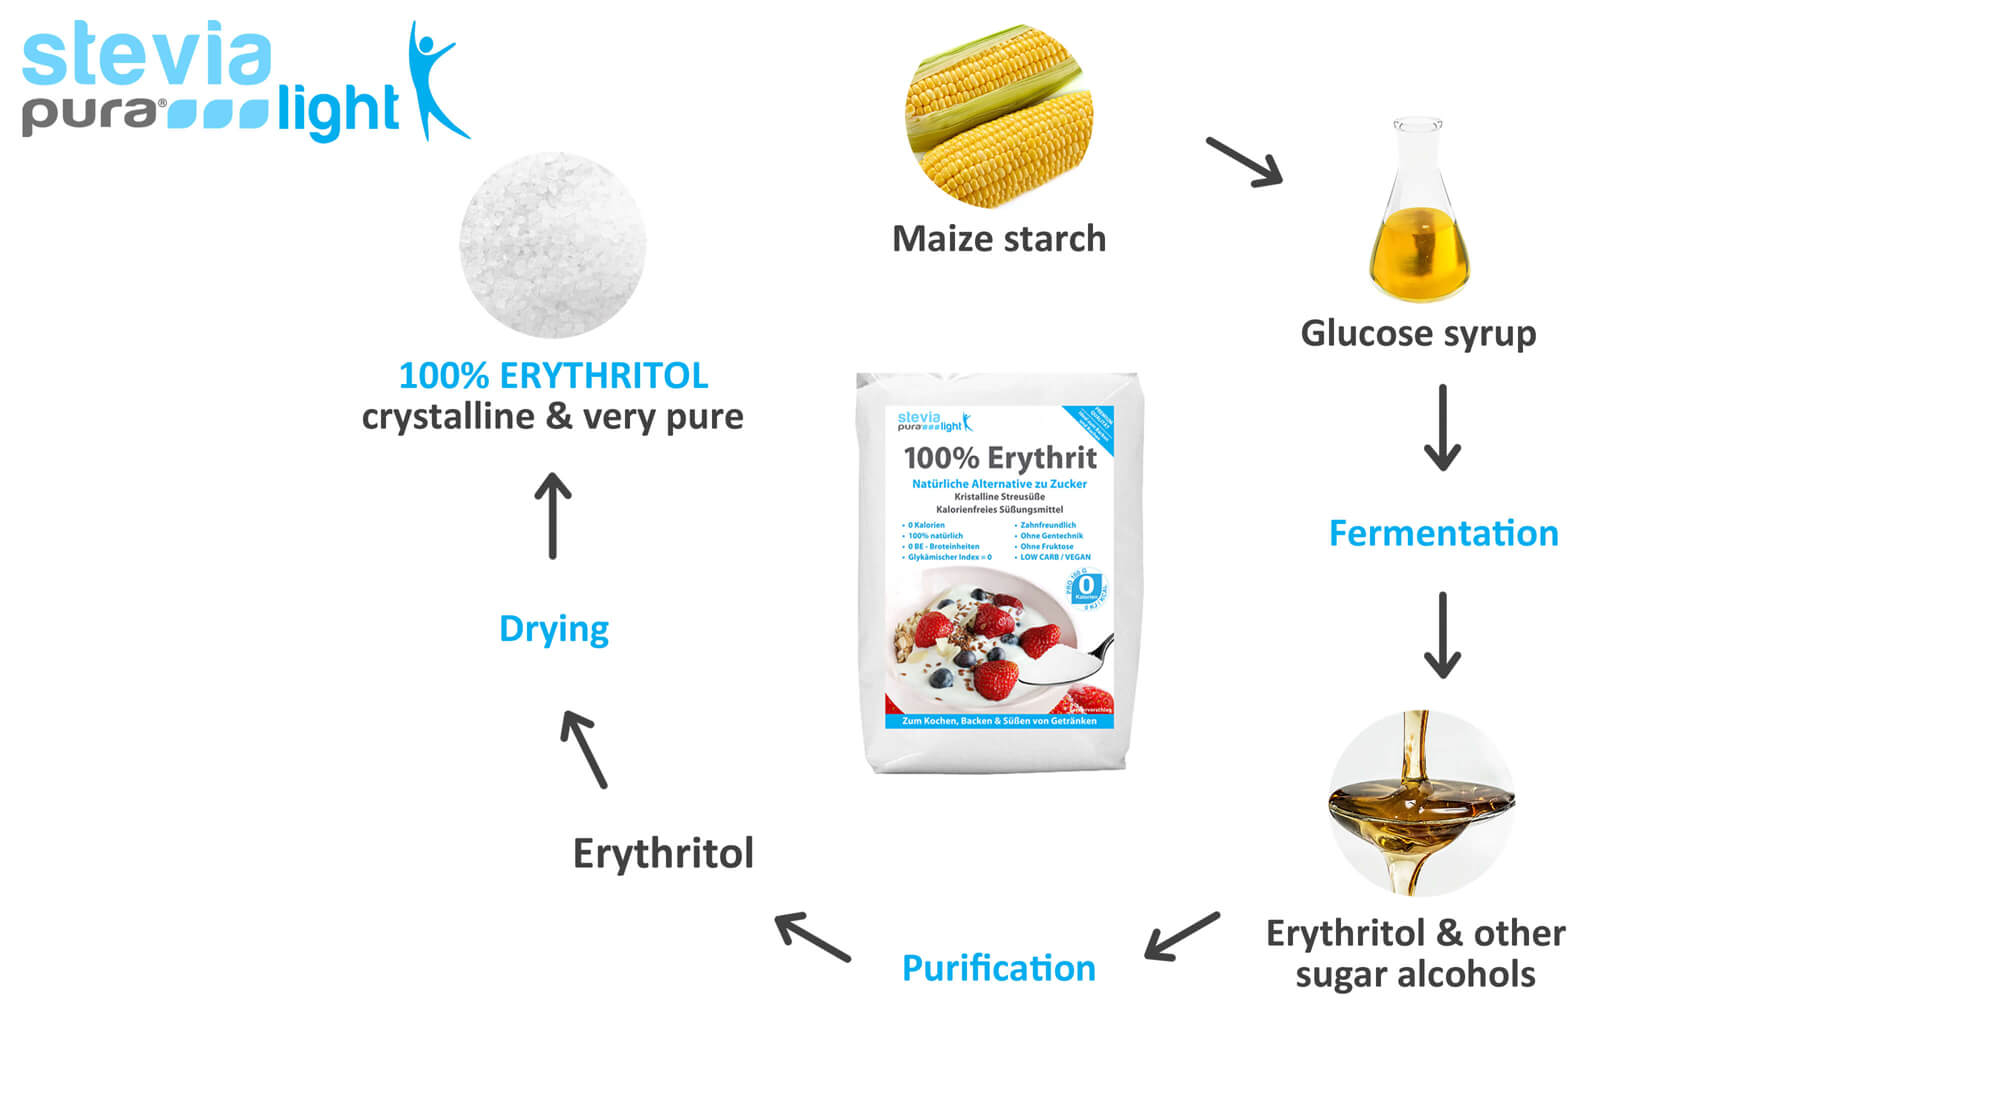 The production of Erythritol: Erythritol is obtained through fermentation.